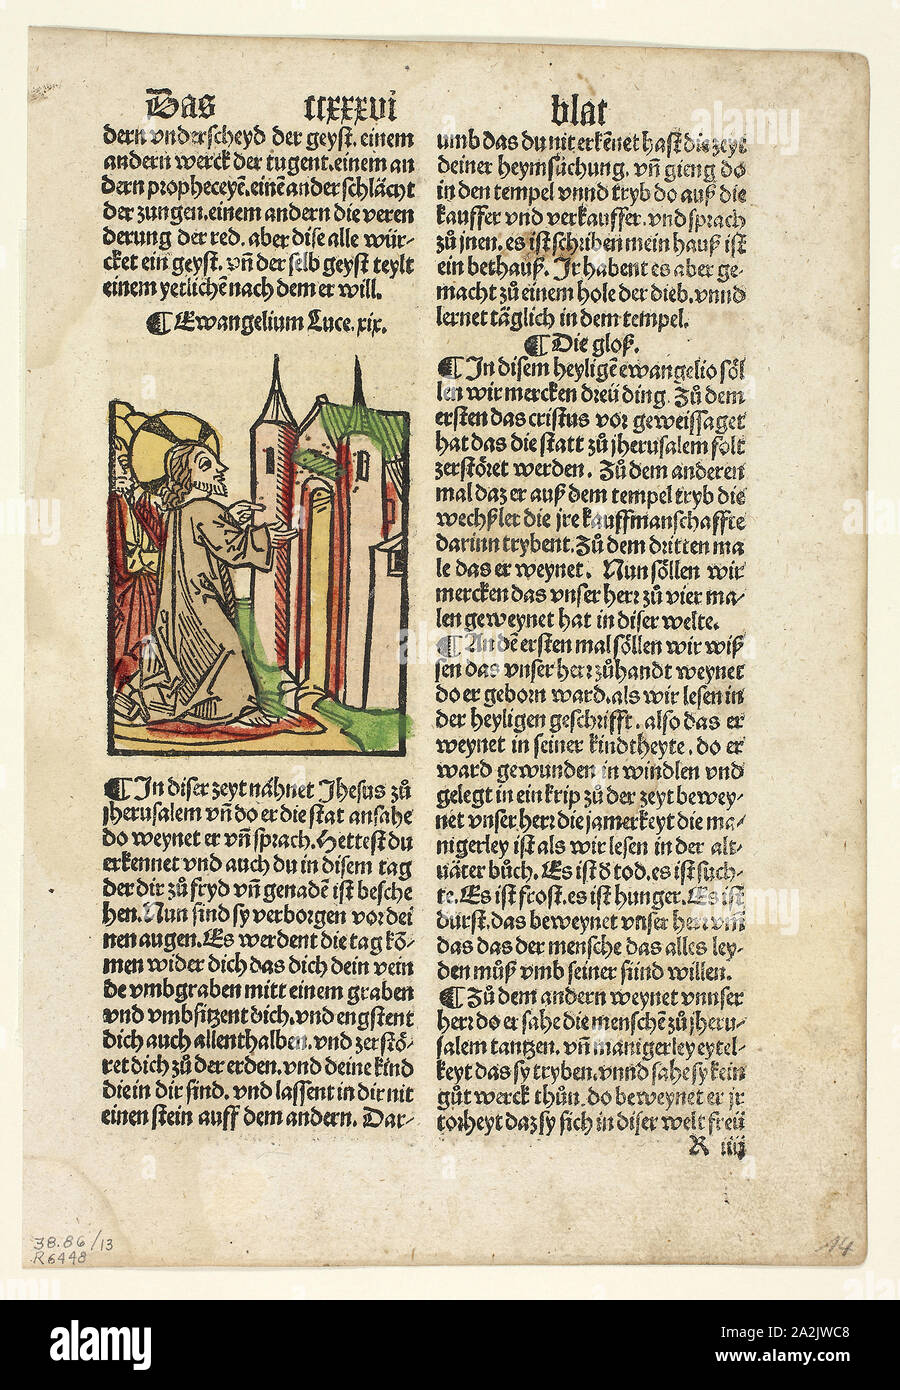 Jesus Foretelling the Destruction of Jerusalem from Spiegel menschlicher Behältnis (The Mirror of Human Salvation), Plate 13 from Woodcuts from Books of the 15th Century, 1500, portfolio assembled 1929, Unknown Artist  (Augsburg, 15th century), printed and published by Johann Schönsperger the Elder (German, c. 1455–1521), portfolio text by Wilhelm Ludwig Schreiber (German, 1855–1932), Germany, Woodcut in black with hand-colored additions, and letterpress in black (recto and verso), on buff laid paper, tipped onto cream wove paper mat, 83 x 63 mm (image), 257 x 176 mm (sheet Stock Photo